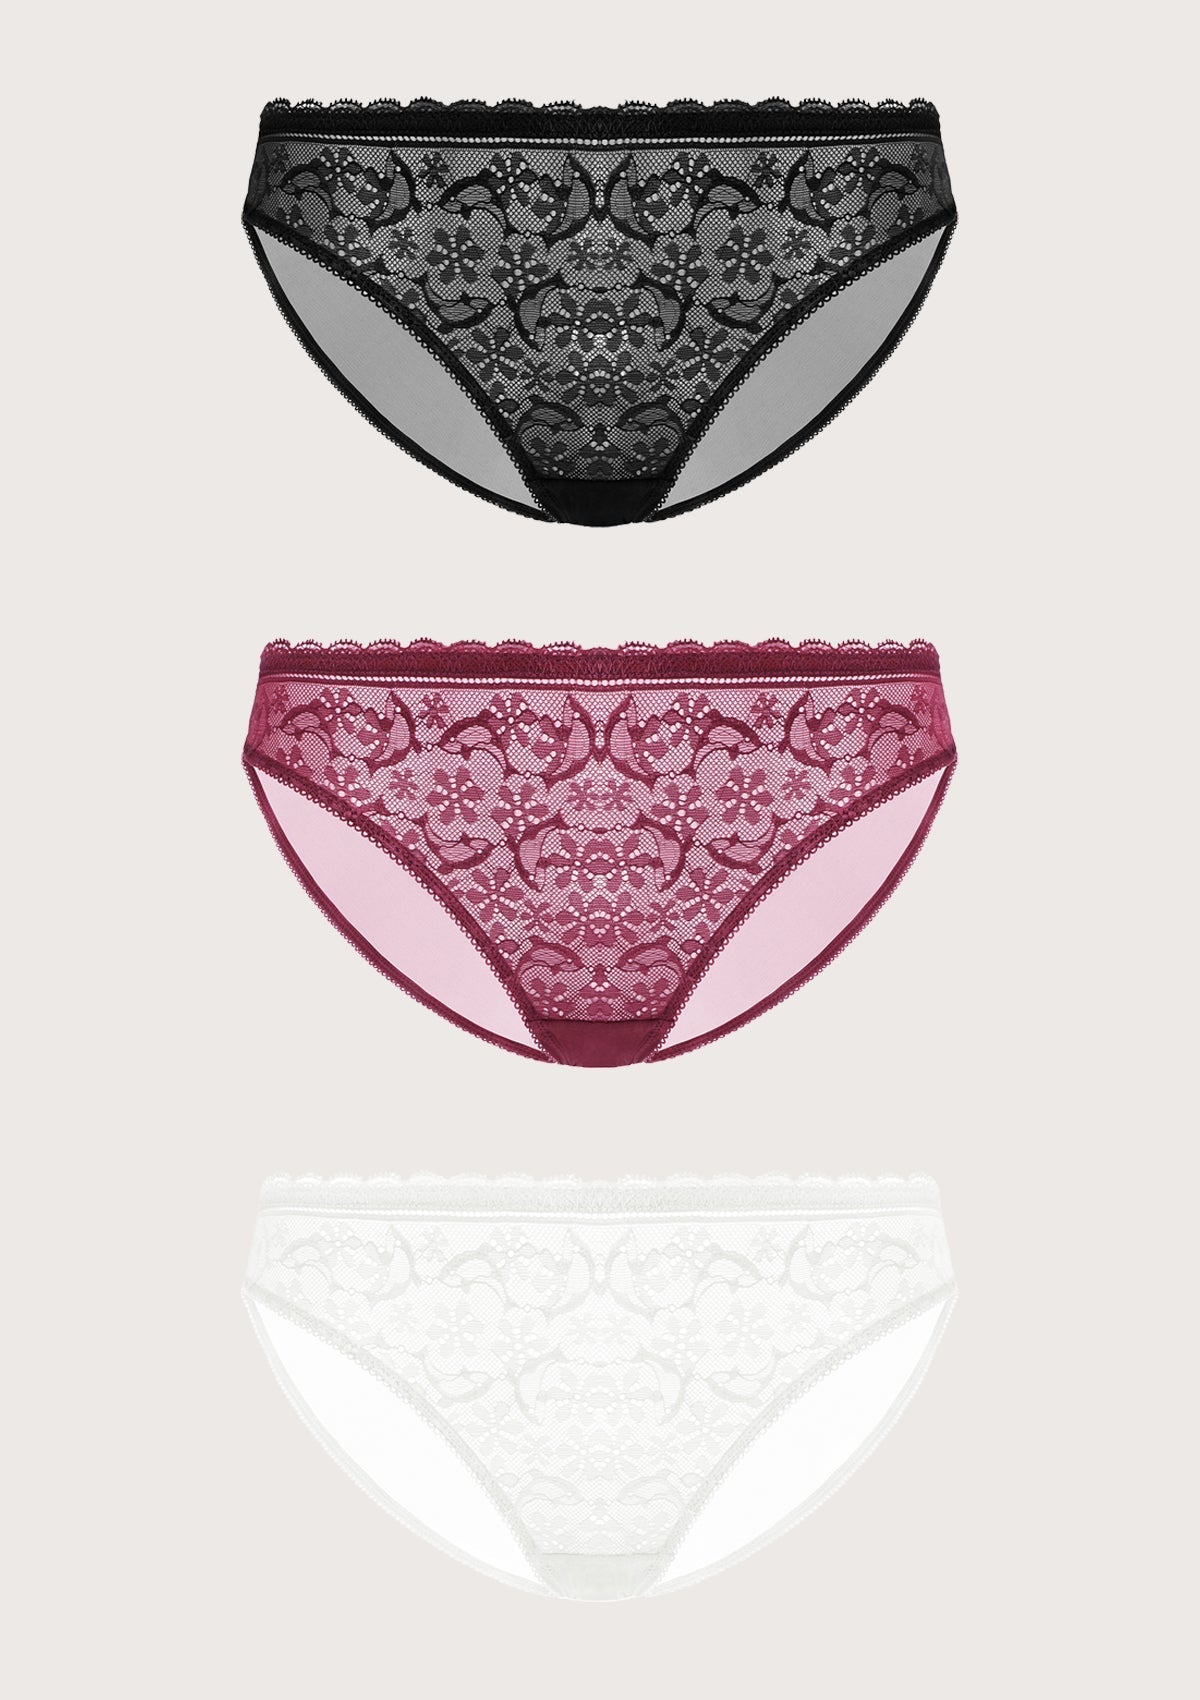 HSIA Anemone Lace Dolphin-Patterned Front And Mesh Back Panties-3 Pack - XXL / Black+Burgundy+White